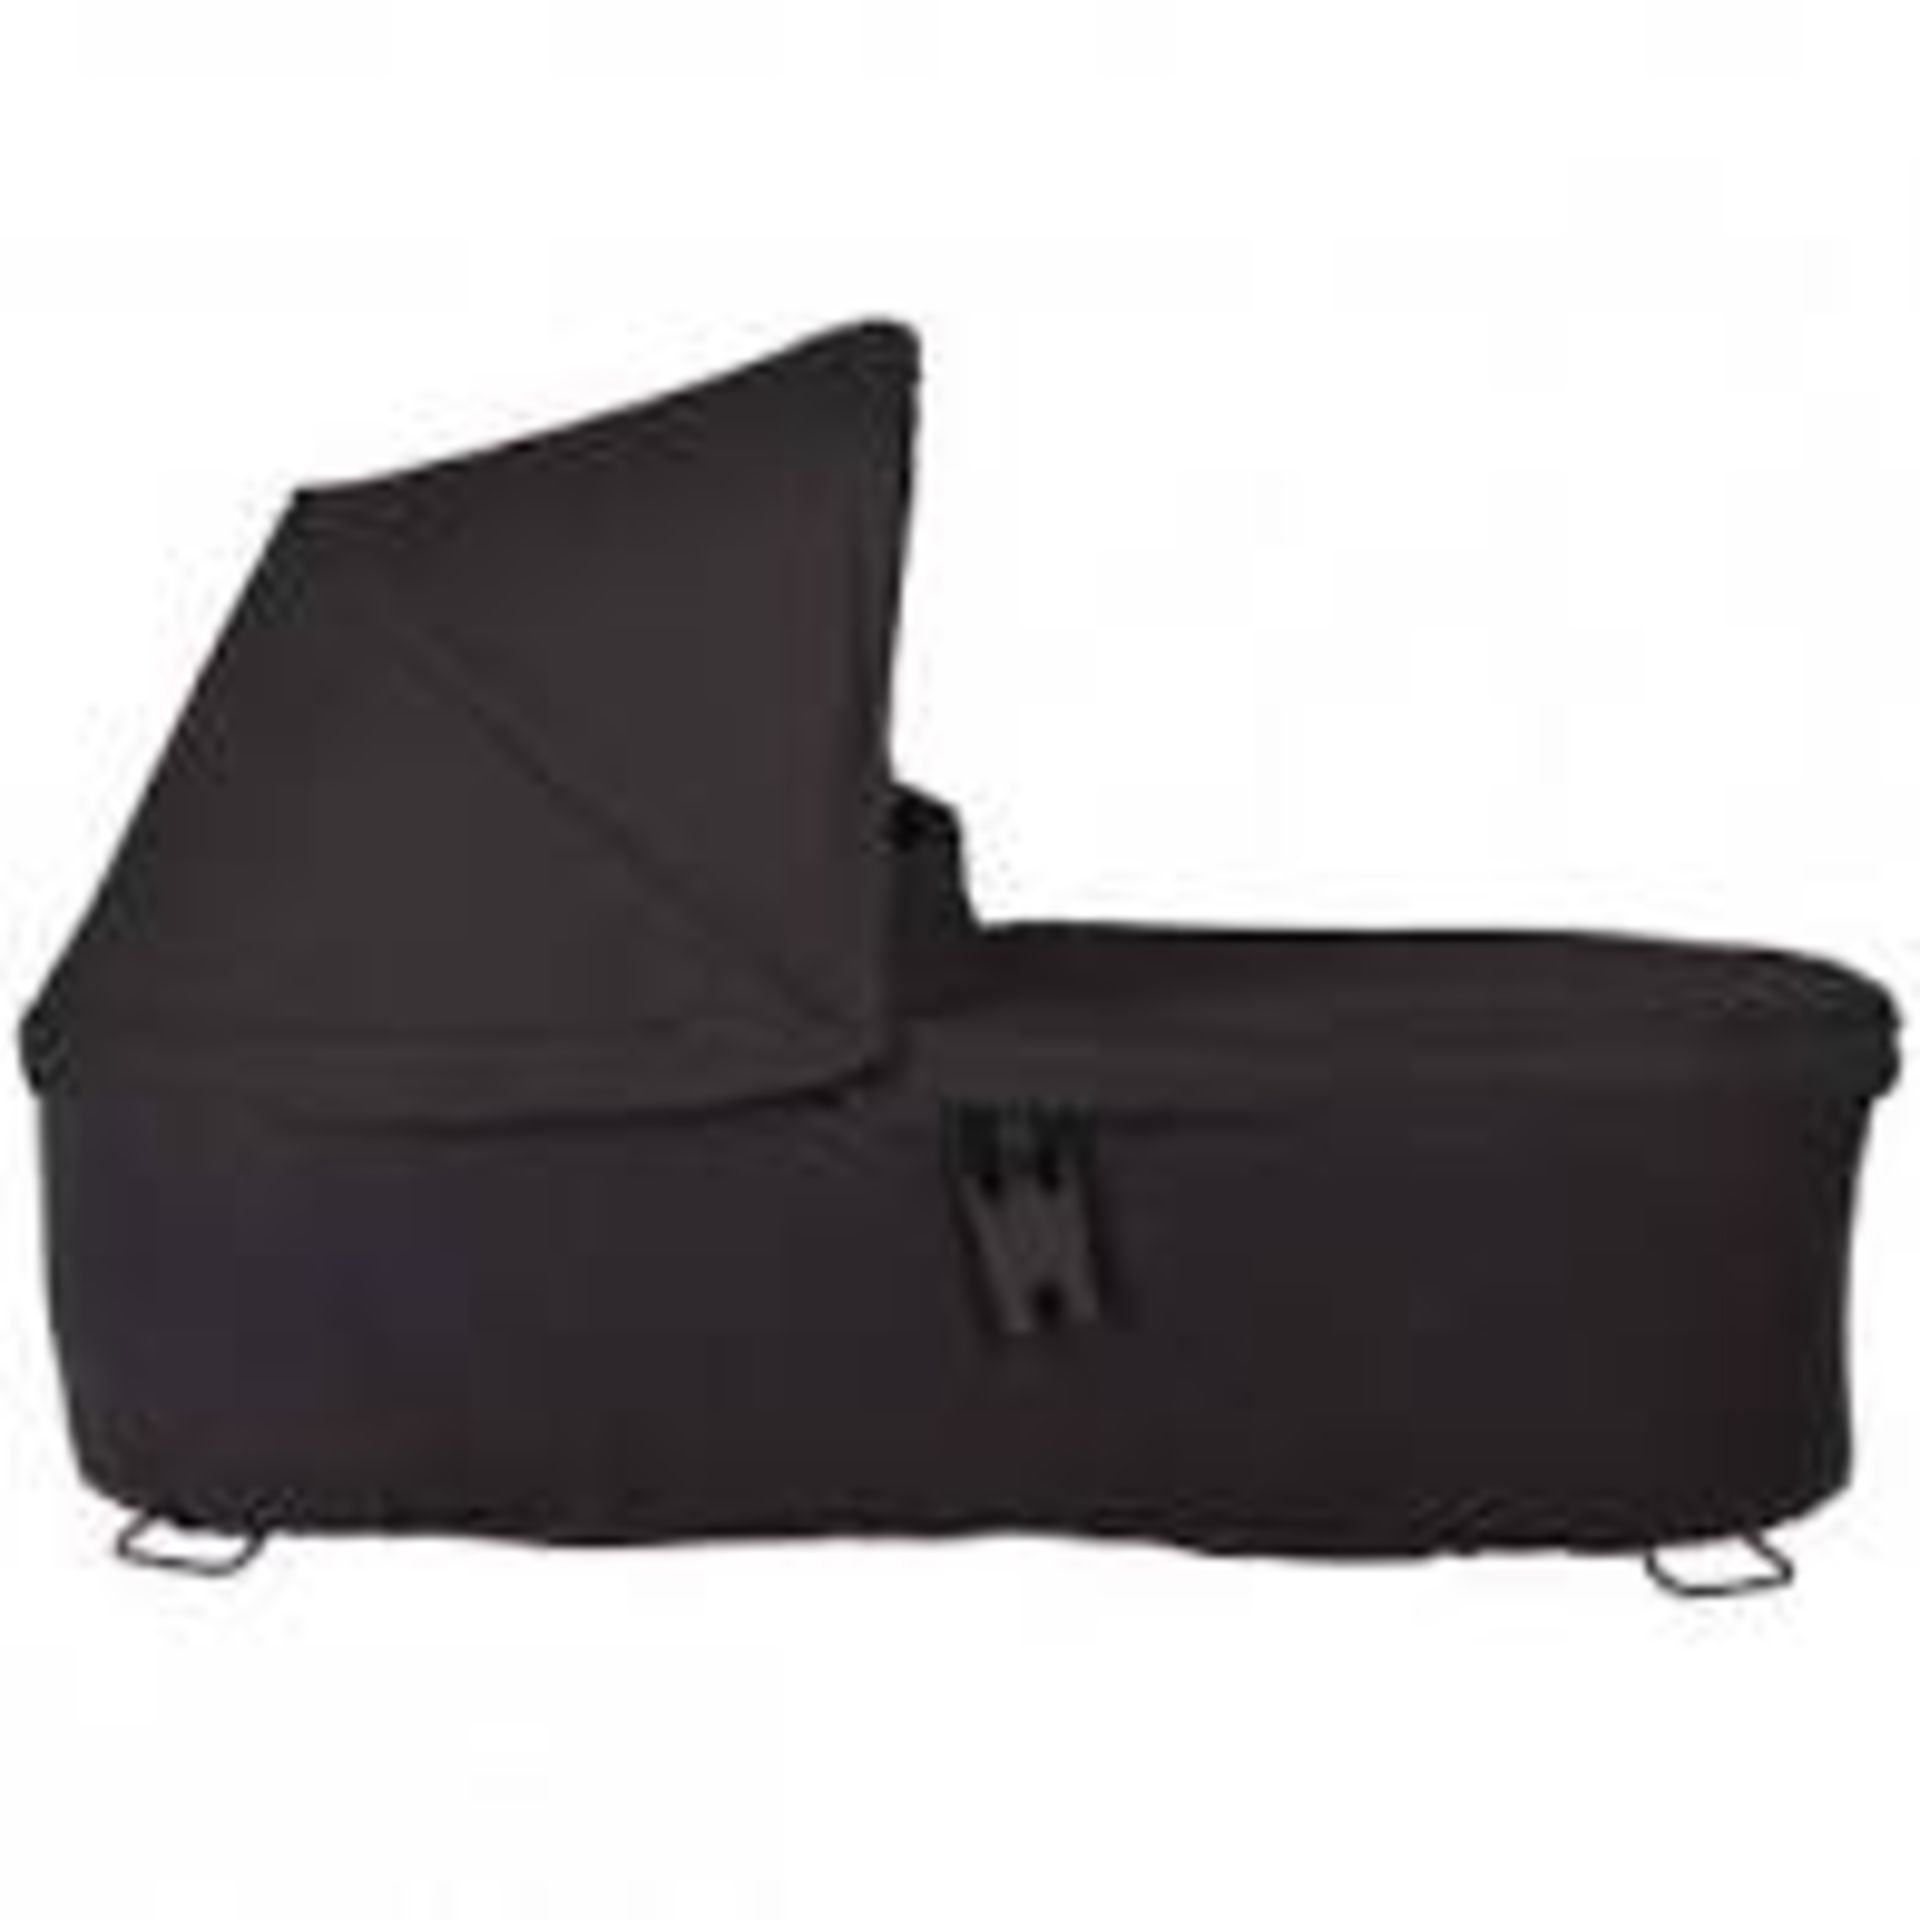 Boxed Mountain Buggy Carry Cot Plus Basinet Carry Cot RRP £200 (74877) (Appraisals Available Upon